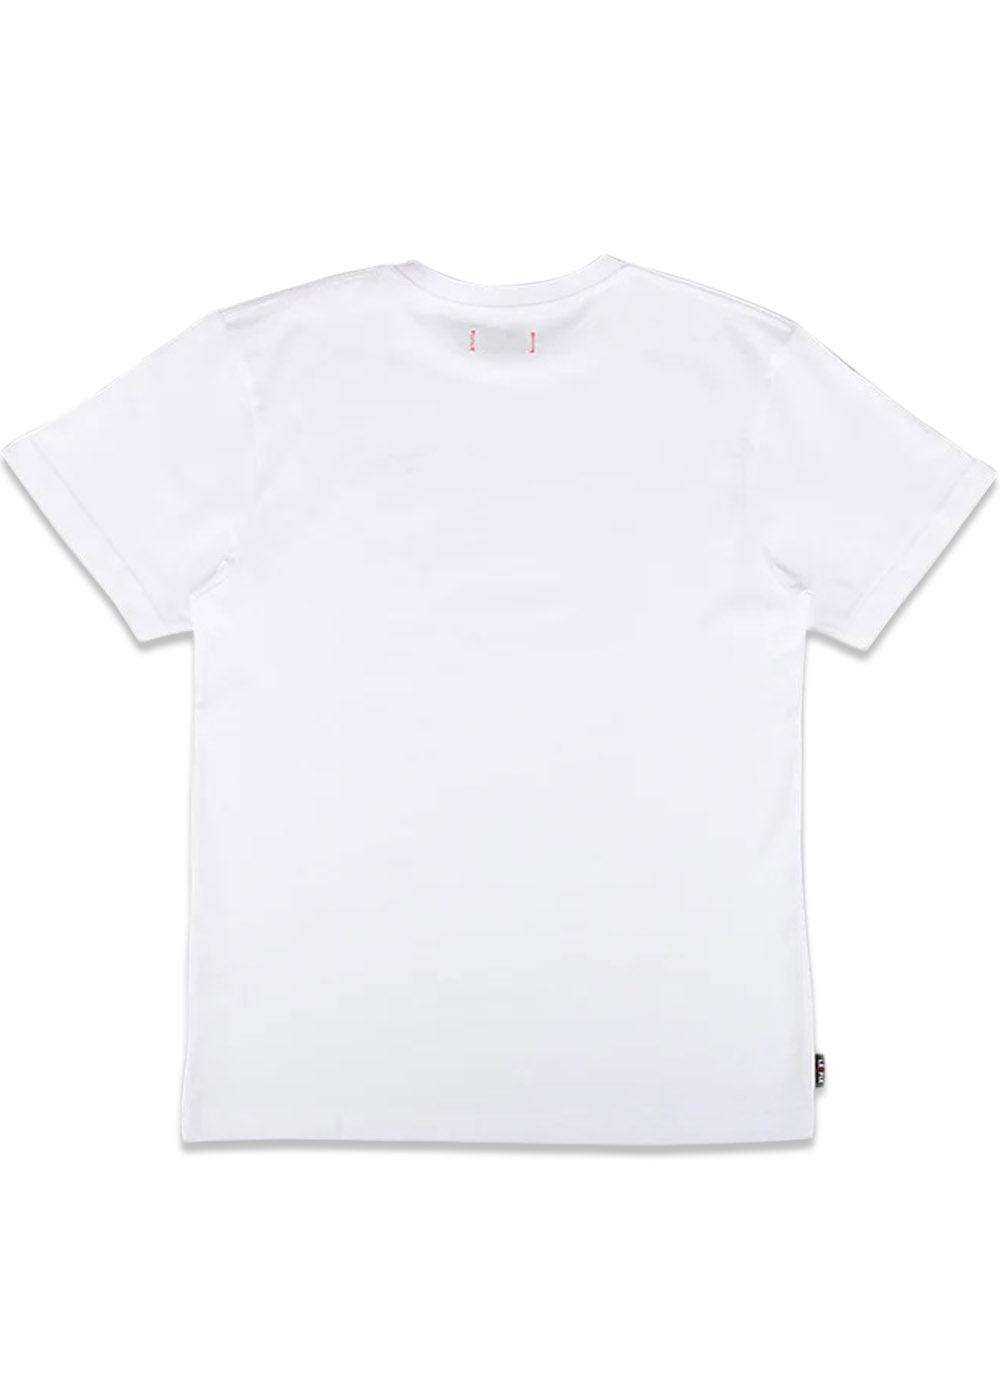 LF Patch Tee - White